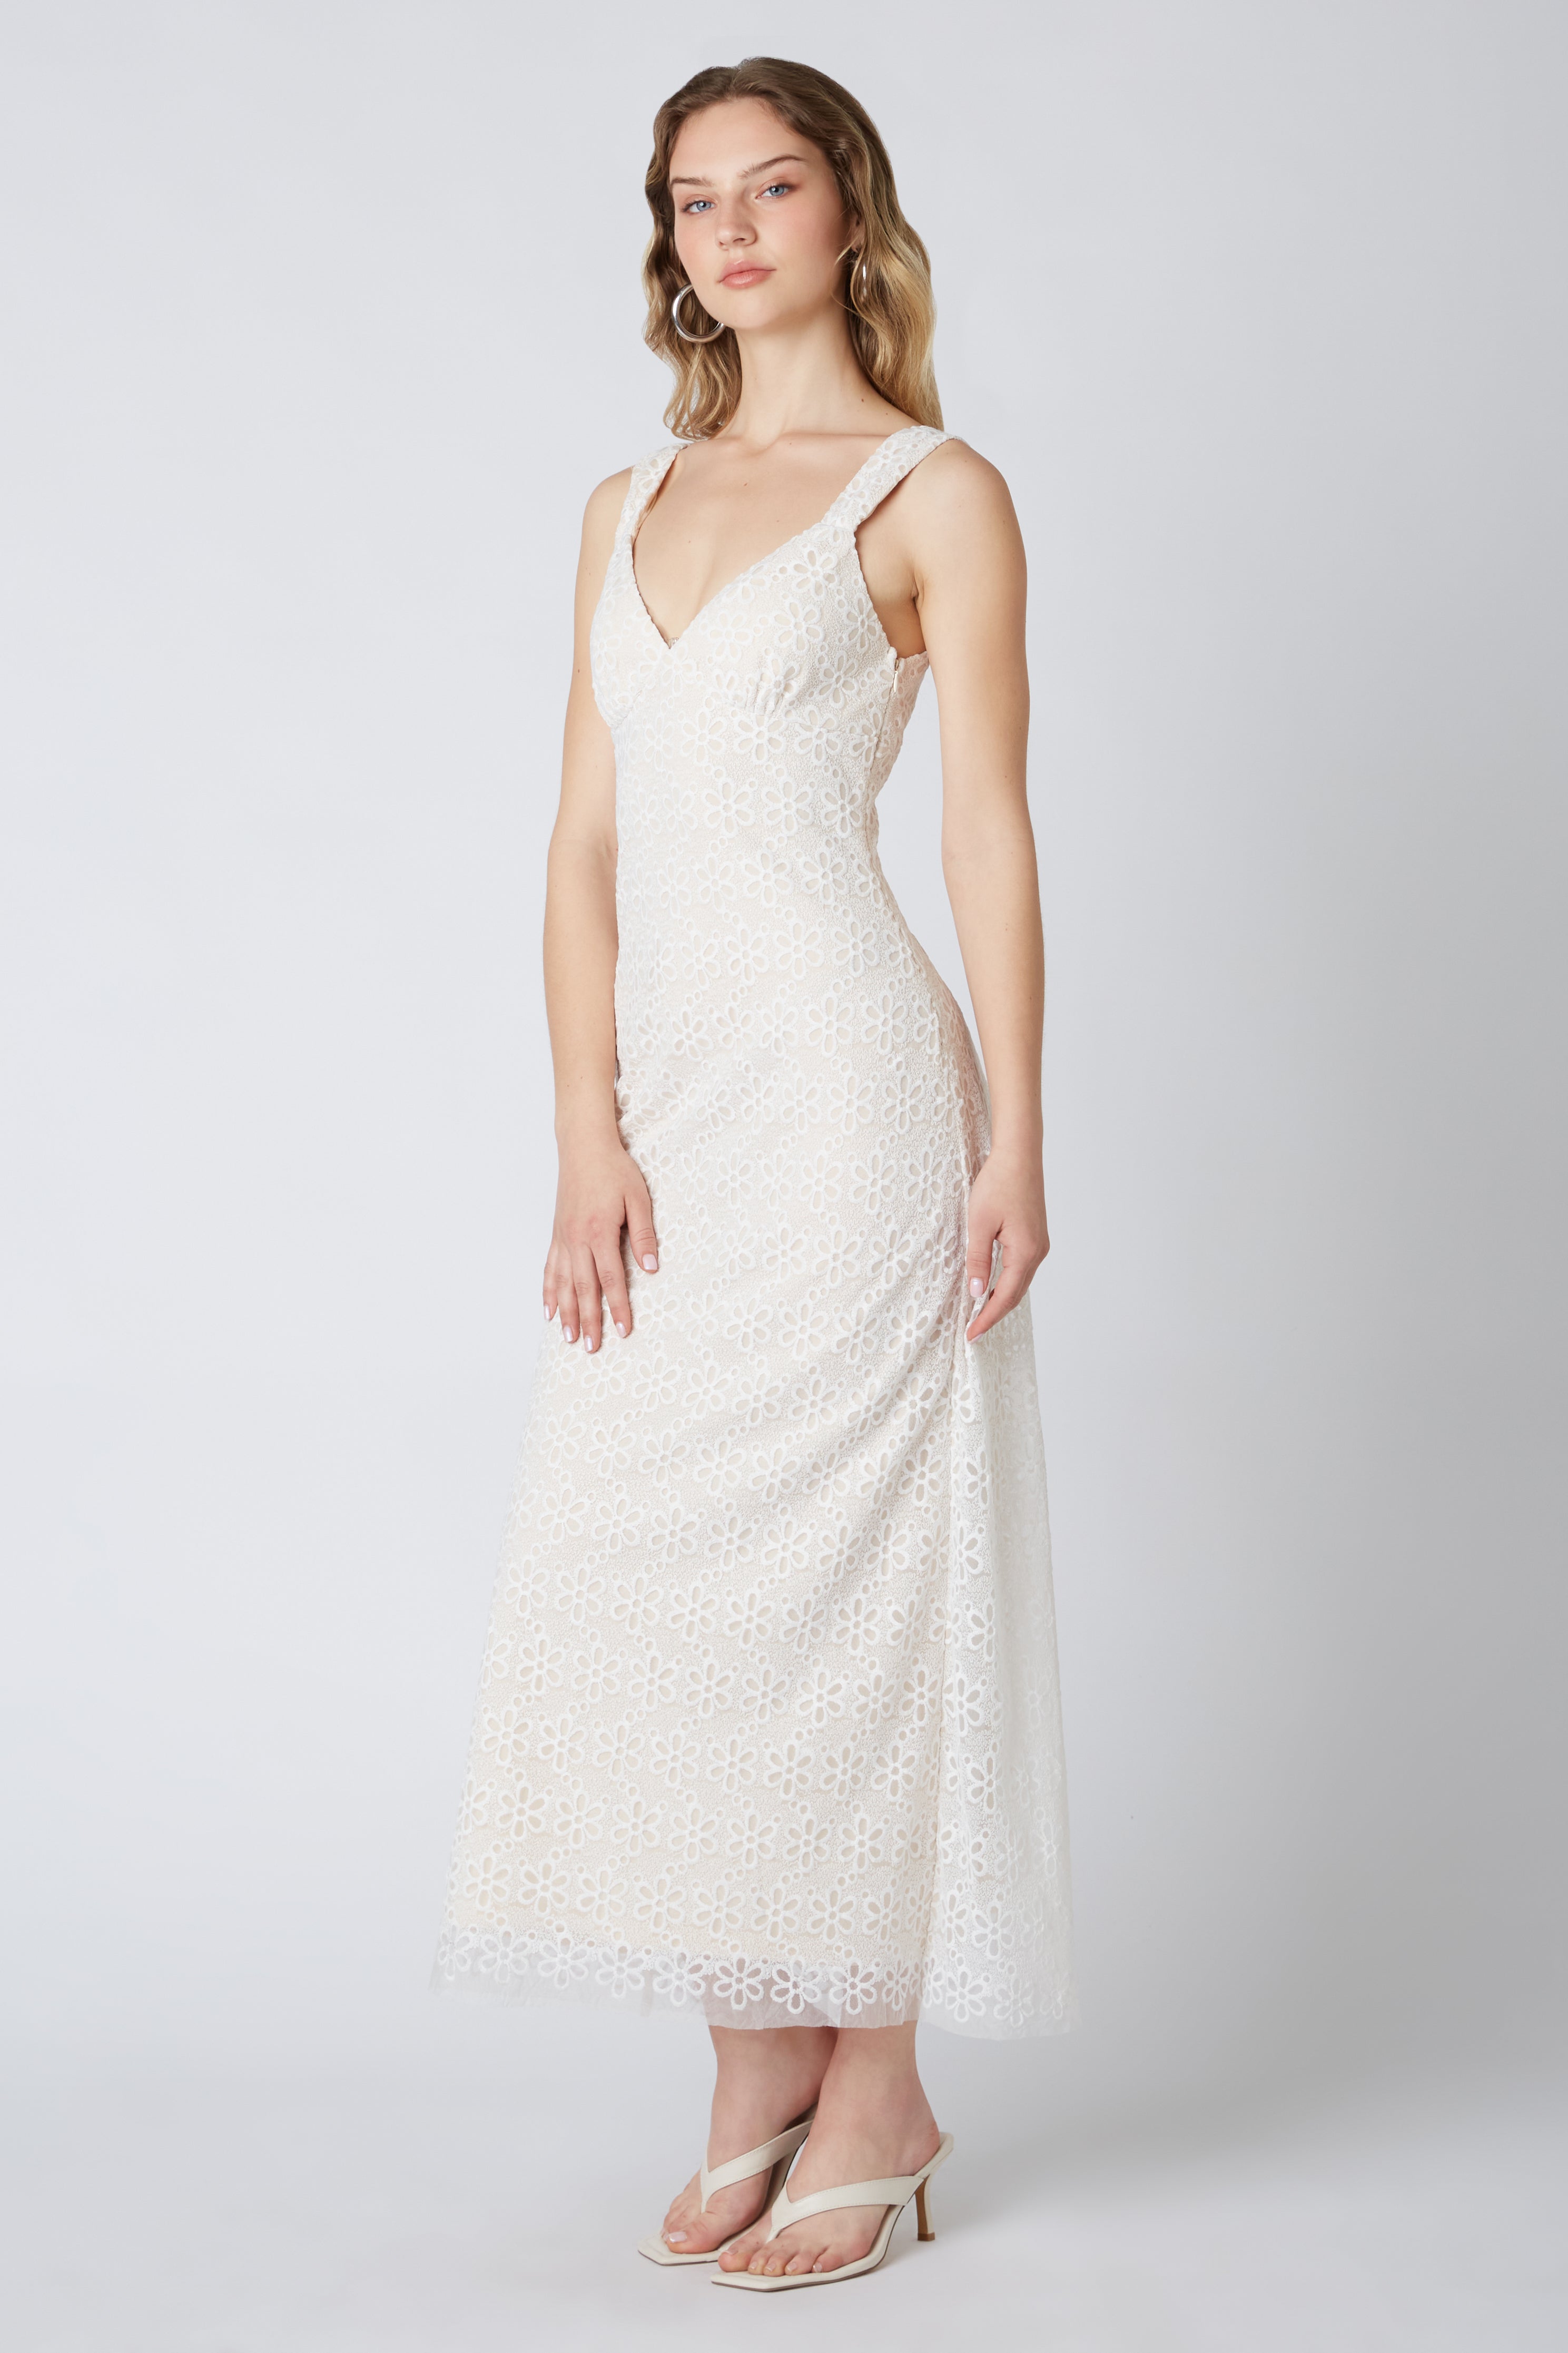 Lace Mesh Maxi Dress in White Side